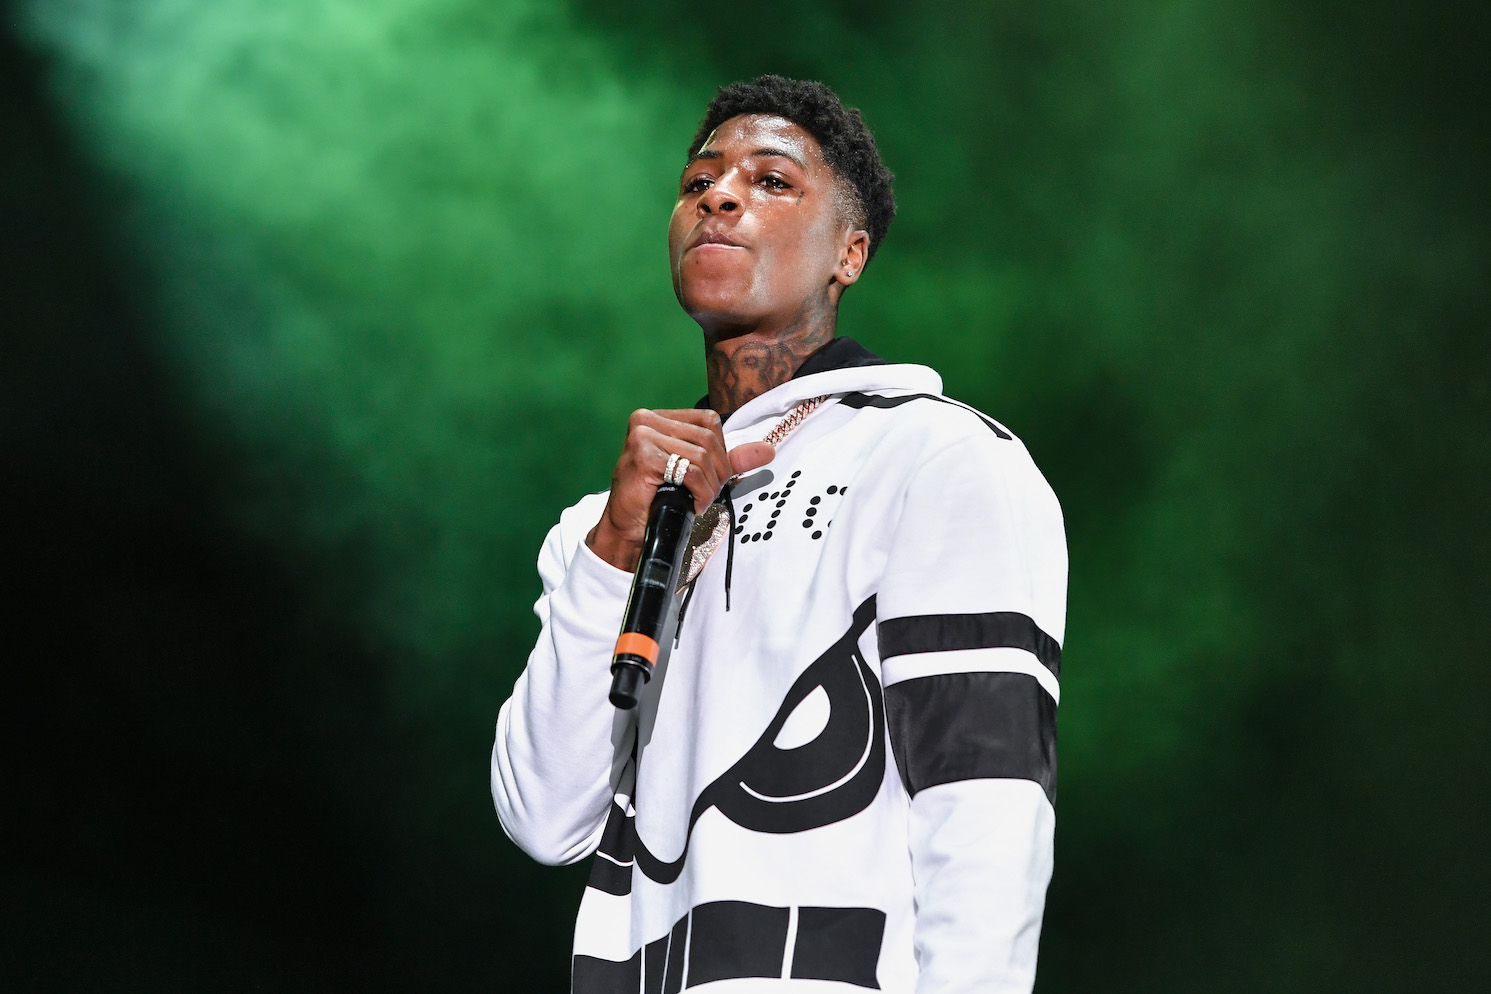 NBA Youngboy standing on stage with the microphone at his chest